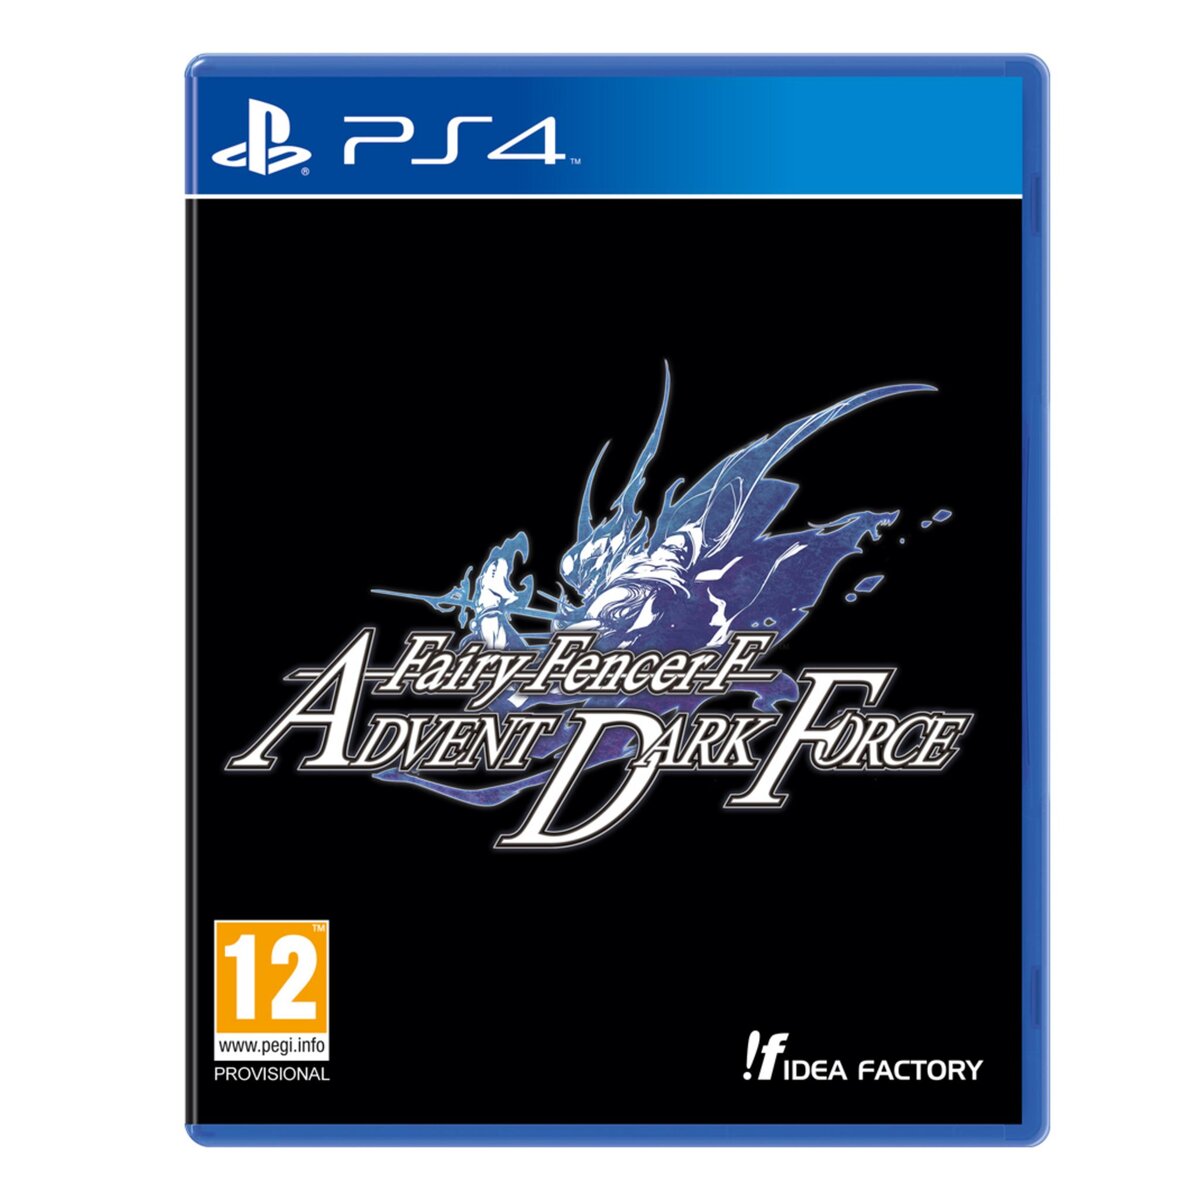 Fairy Spencer F : Advent Dark Force PS4